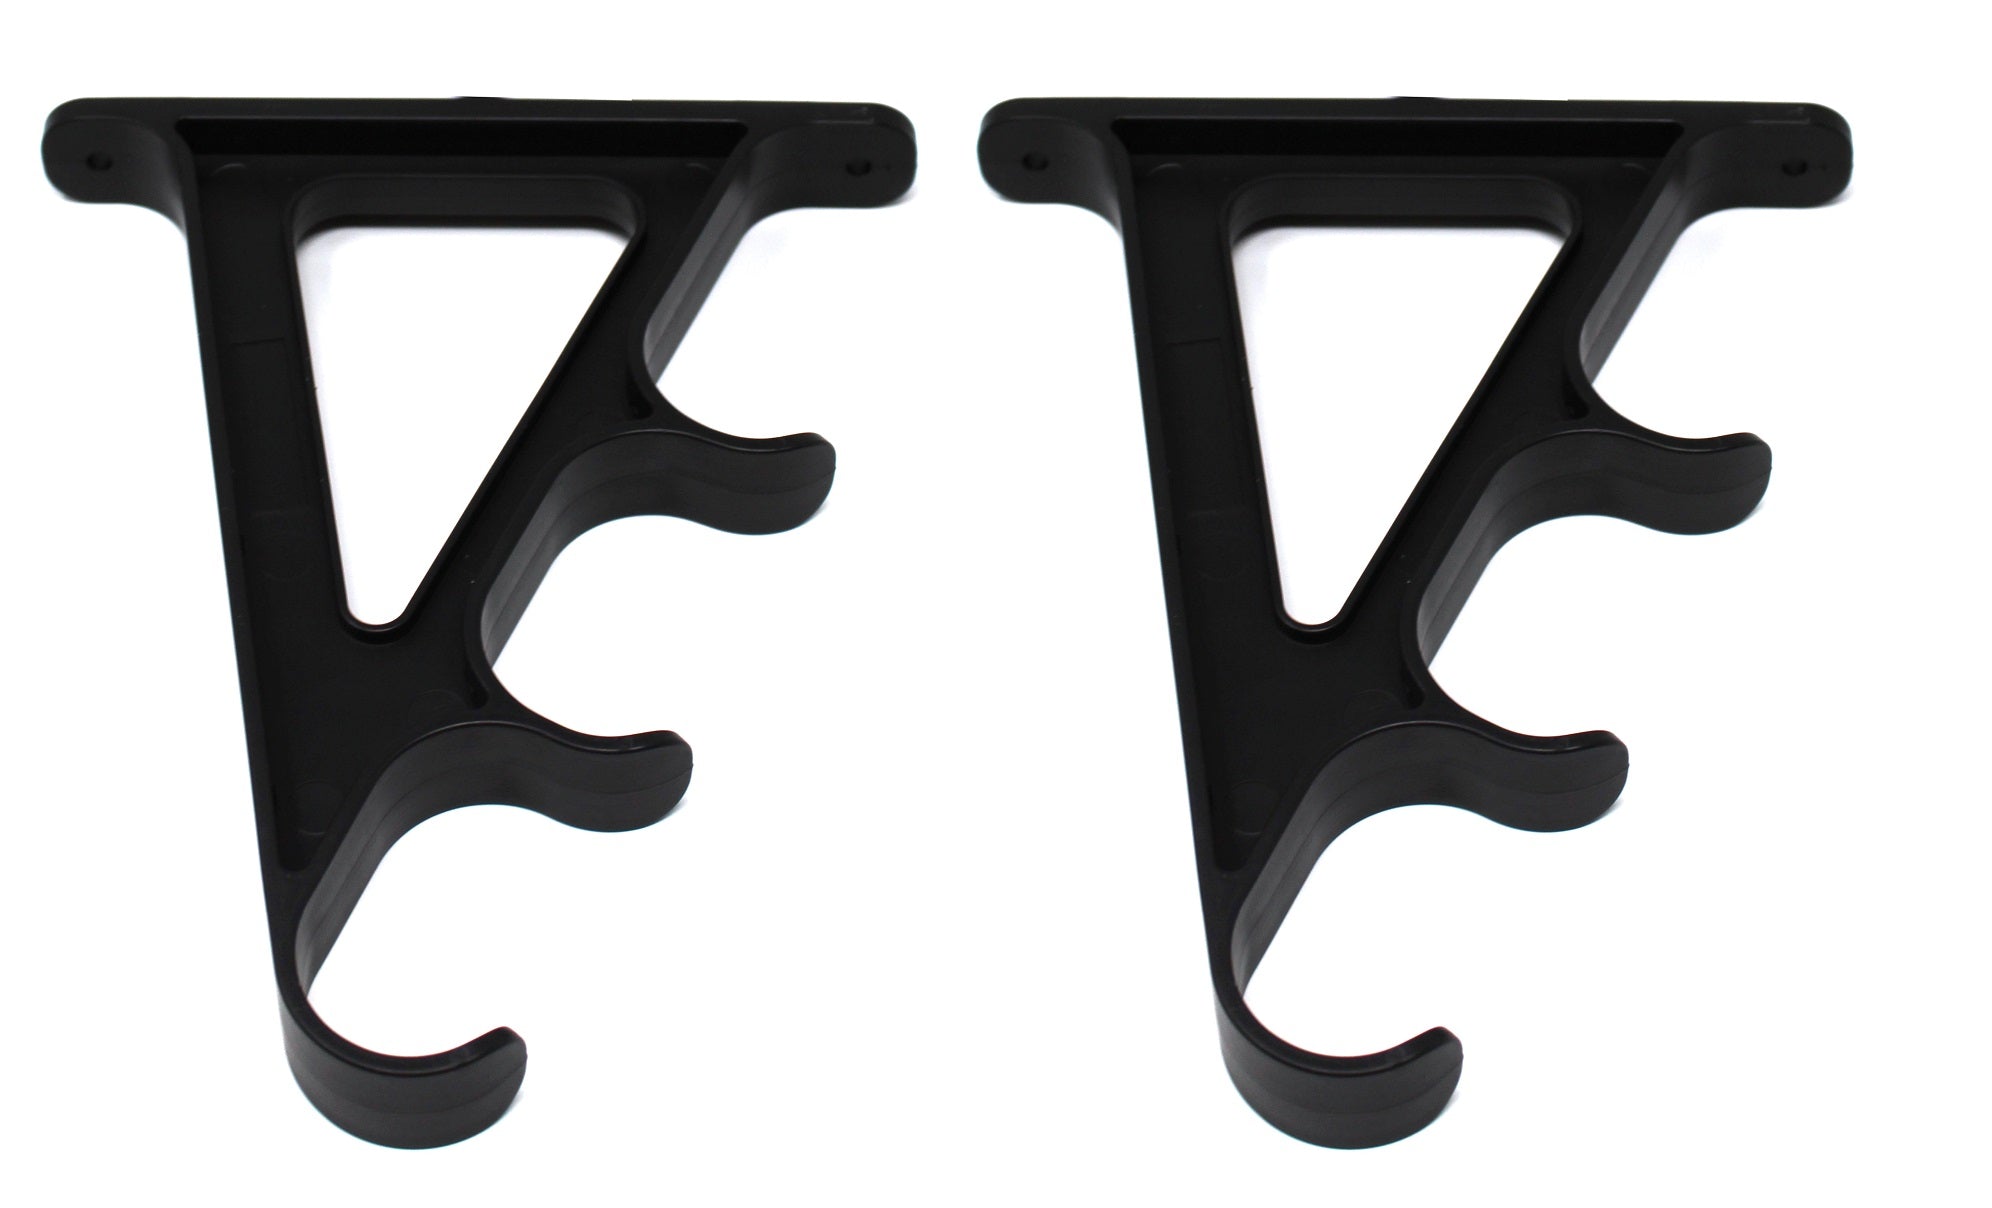 2pcs Wall Mounted Fishing Rod Holder For Rod And Reel, 56% OFF